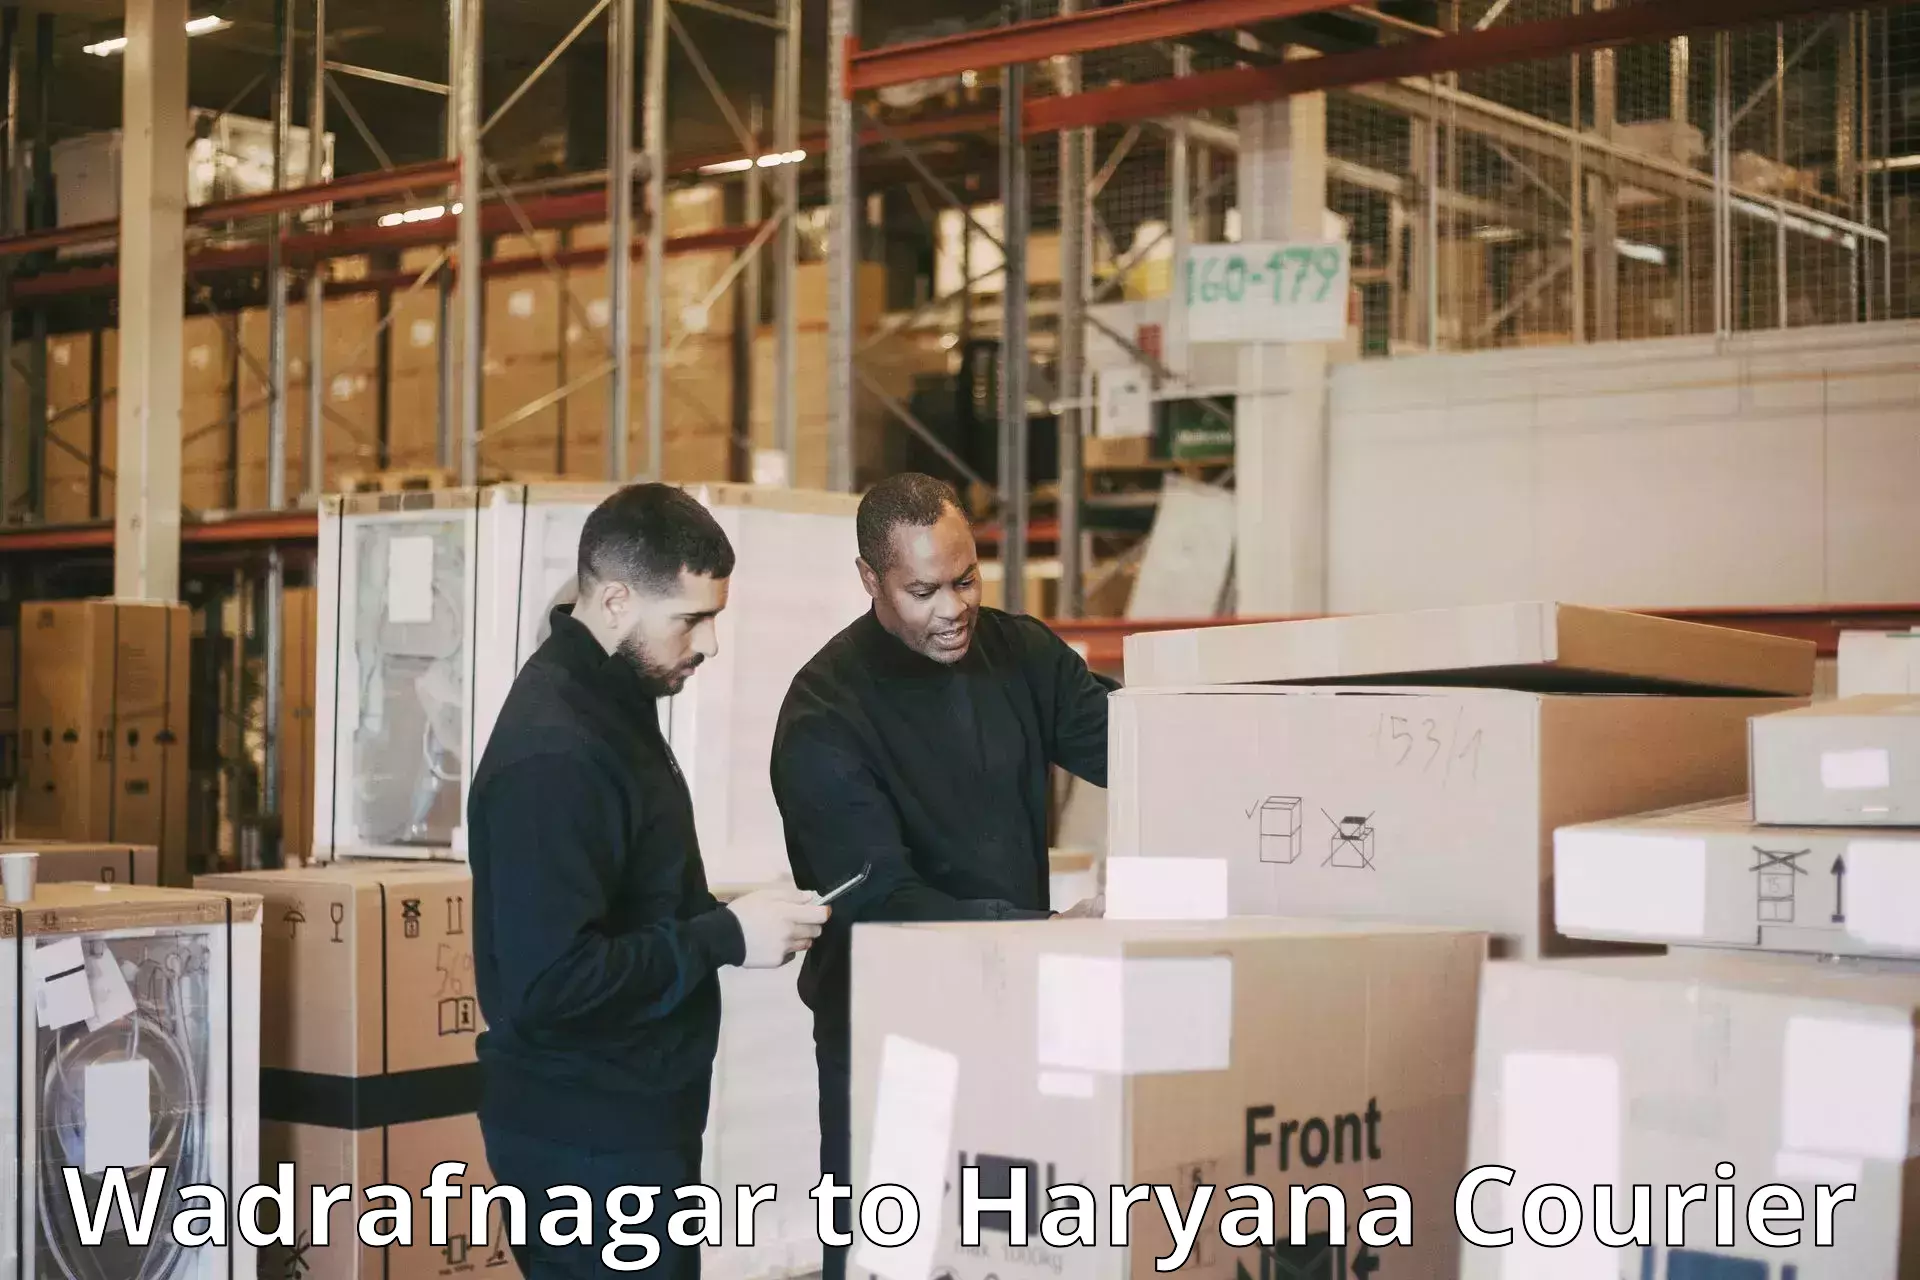 Customized delivery solutions Wadrafnagar to Haryana